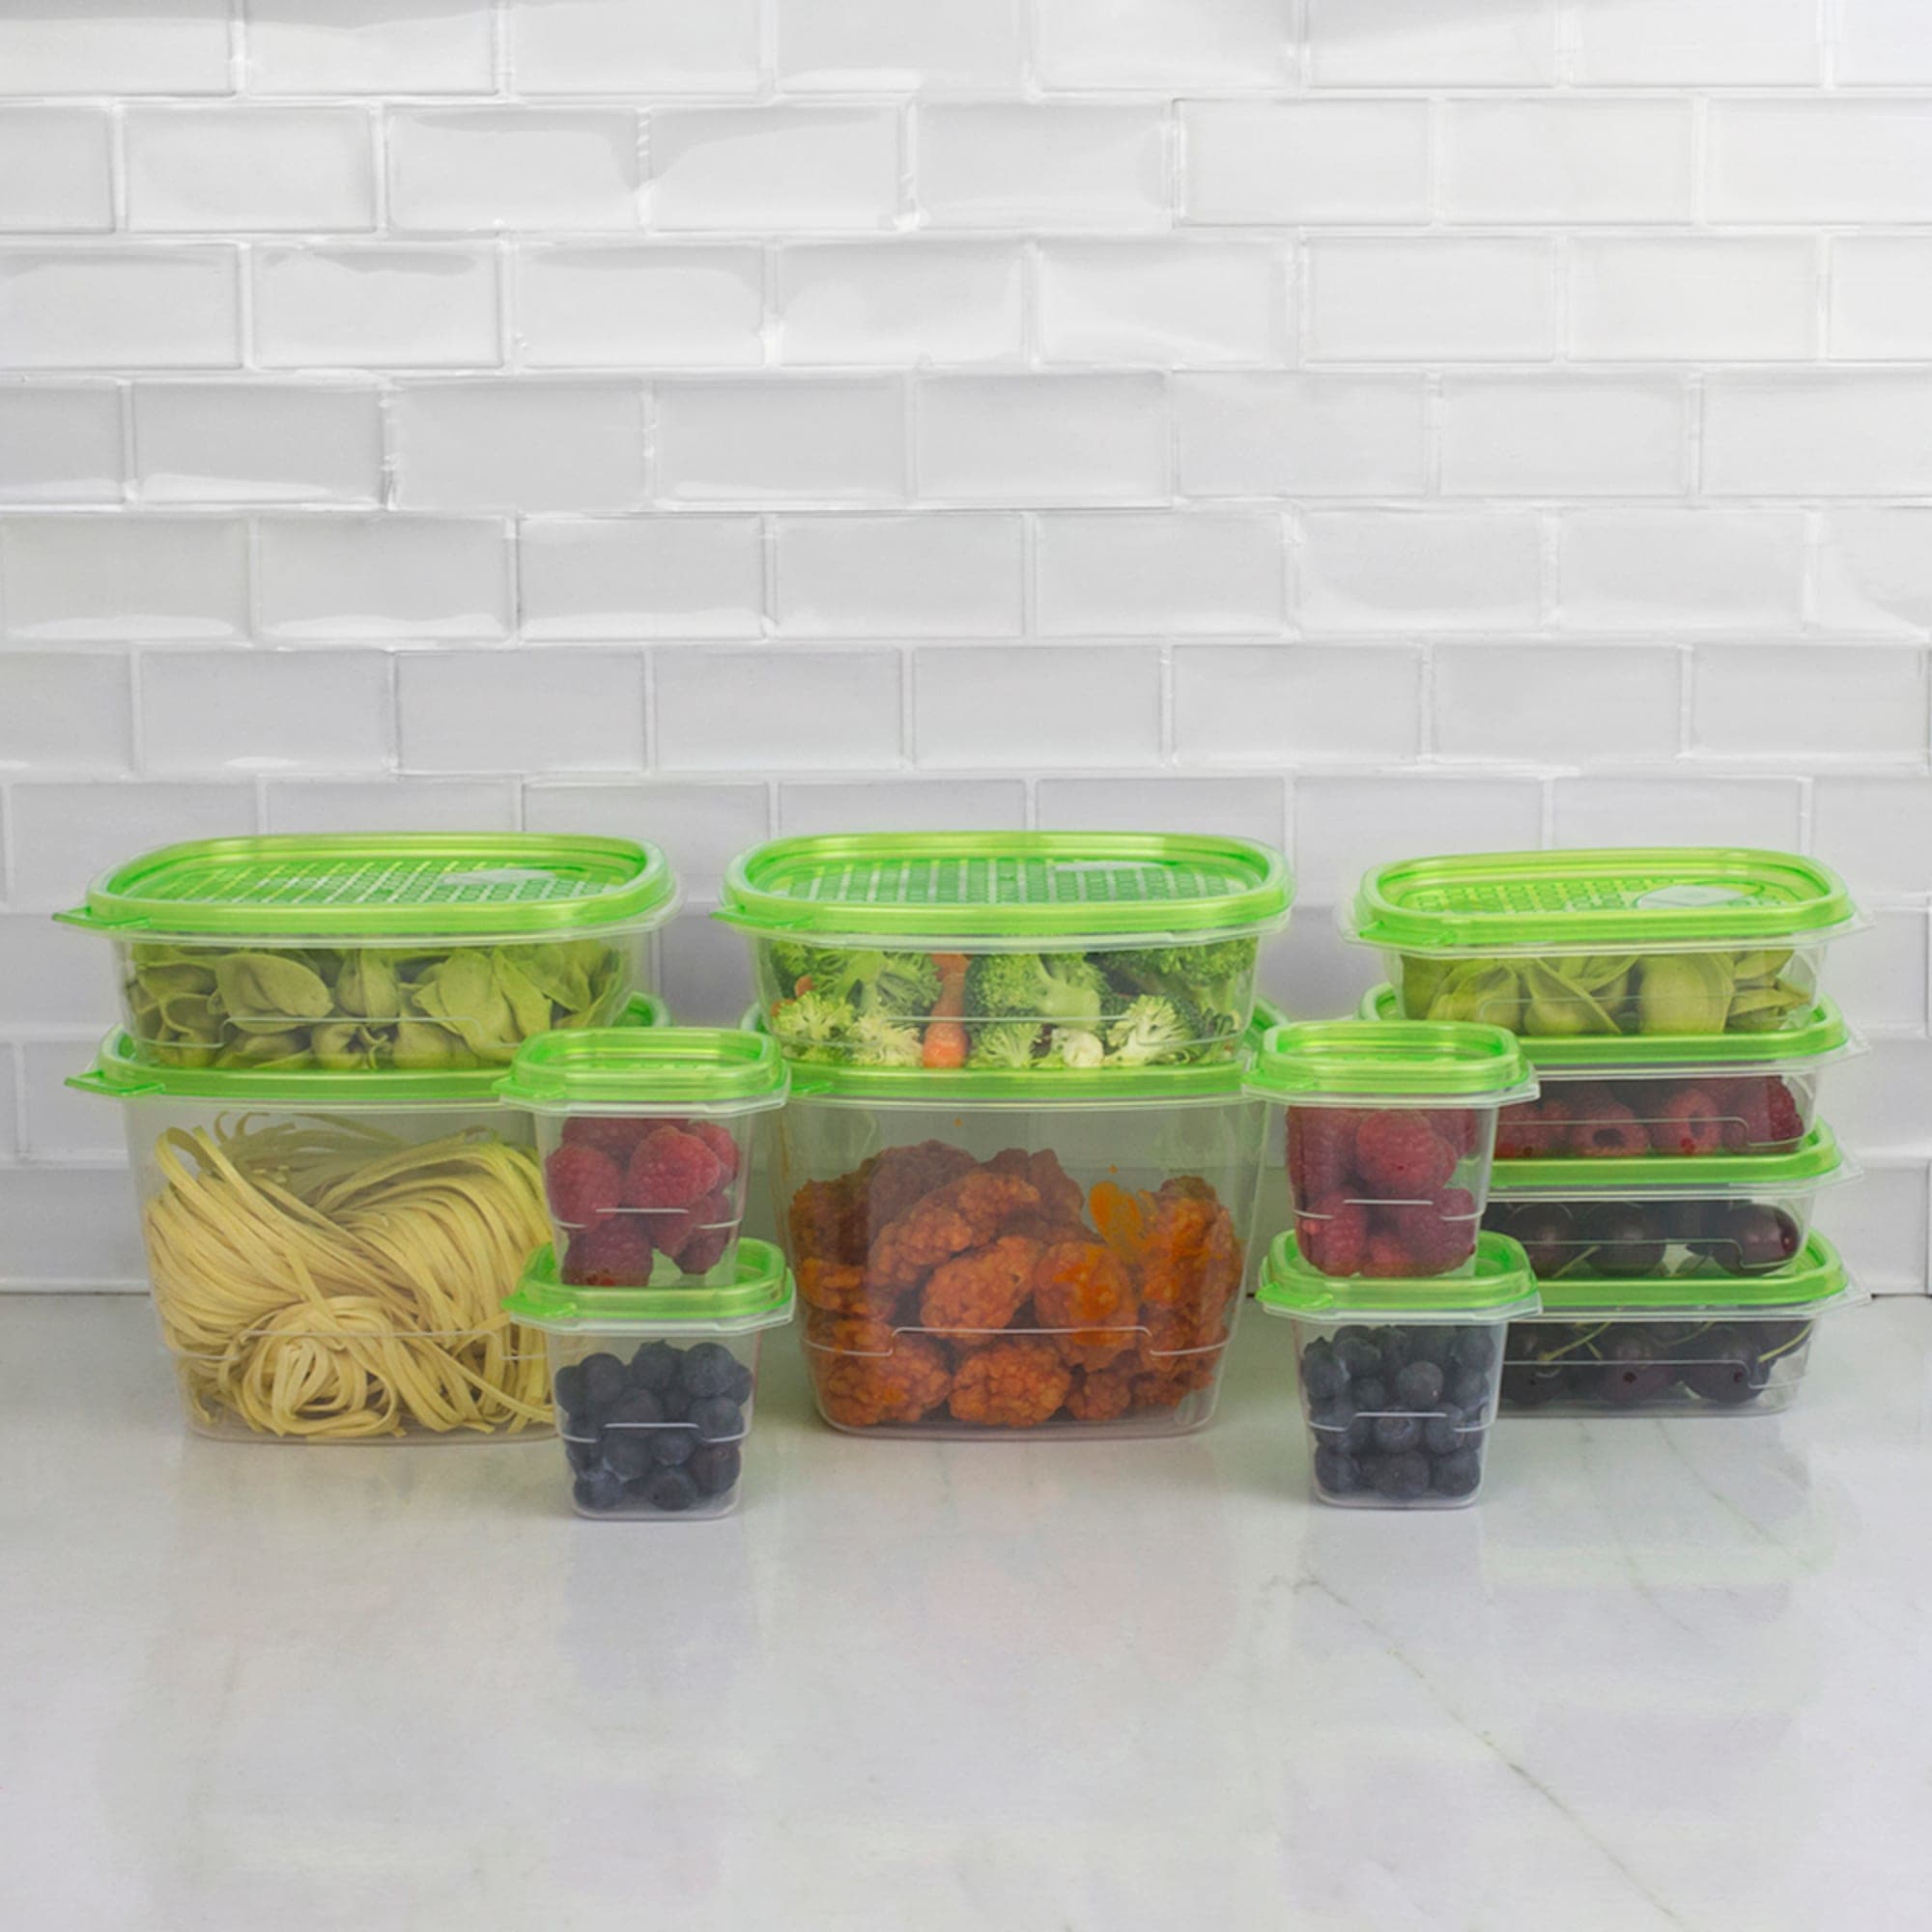 Home Basics 12 Piece Plastic Food Storage Container Set with Vented Plastic Lids, Green $6 EACH, CASE PACK OF 4